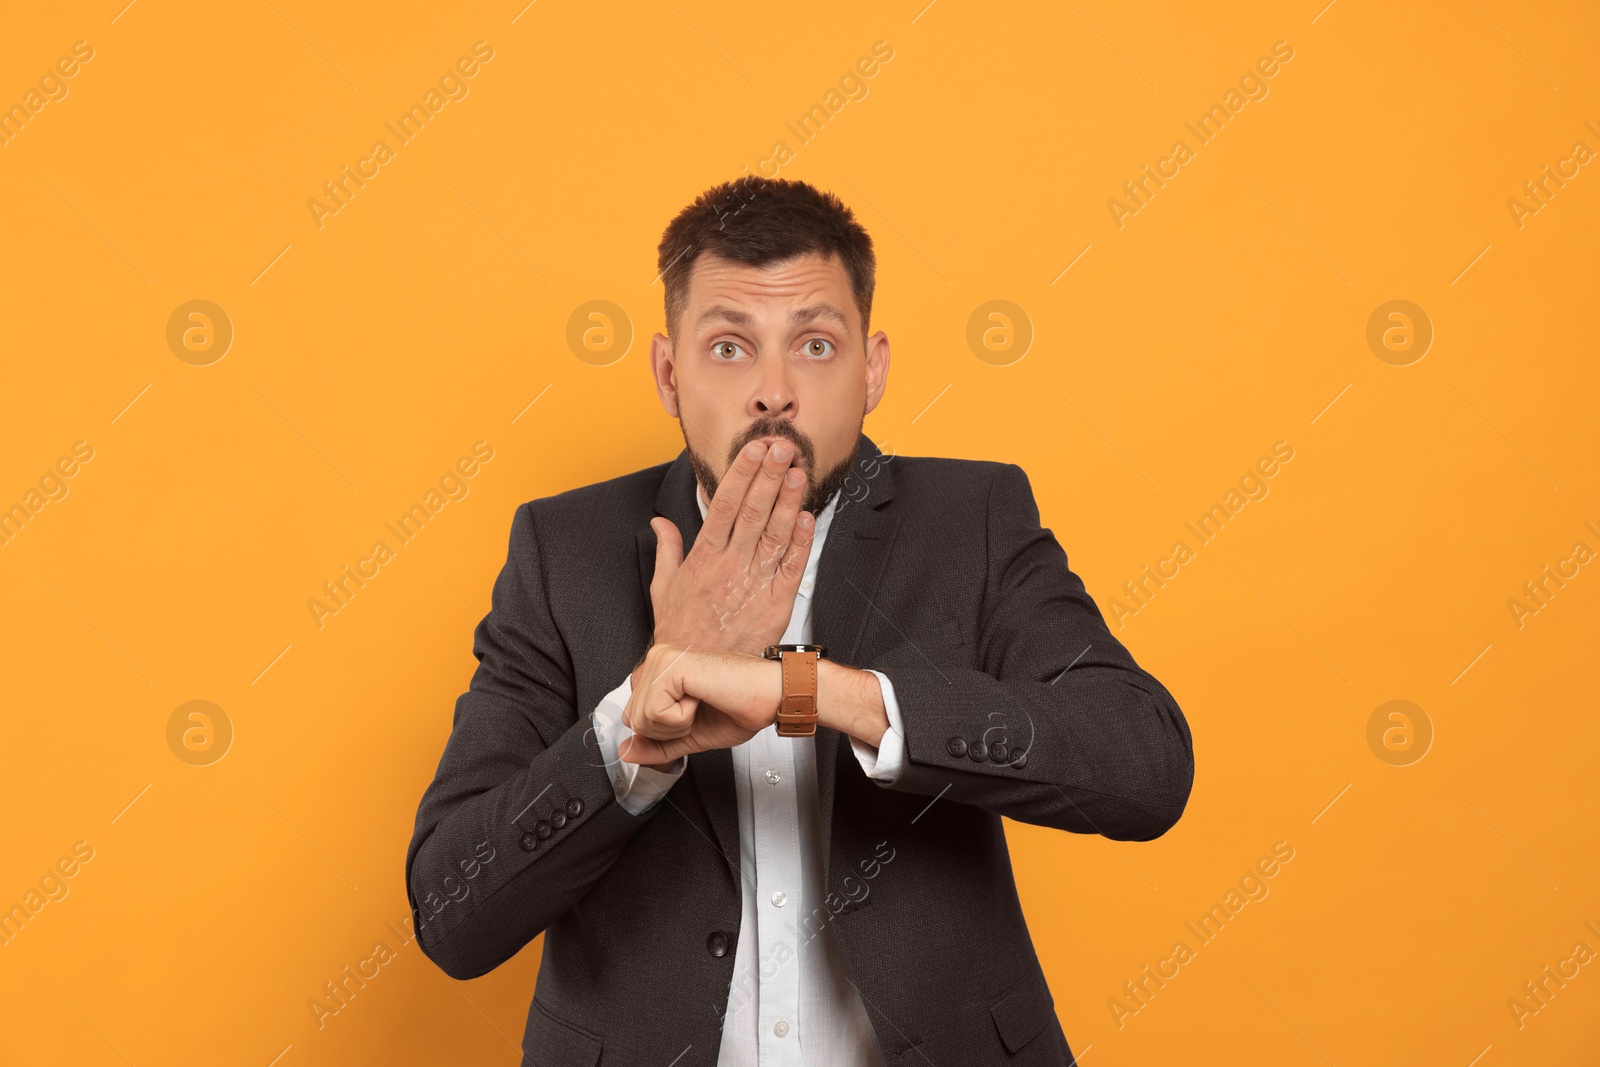 Photo of Emotional man checking time on orange background. Being late concept